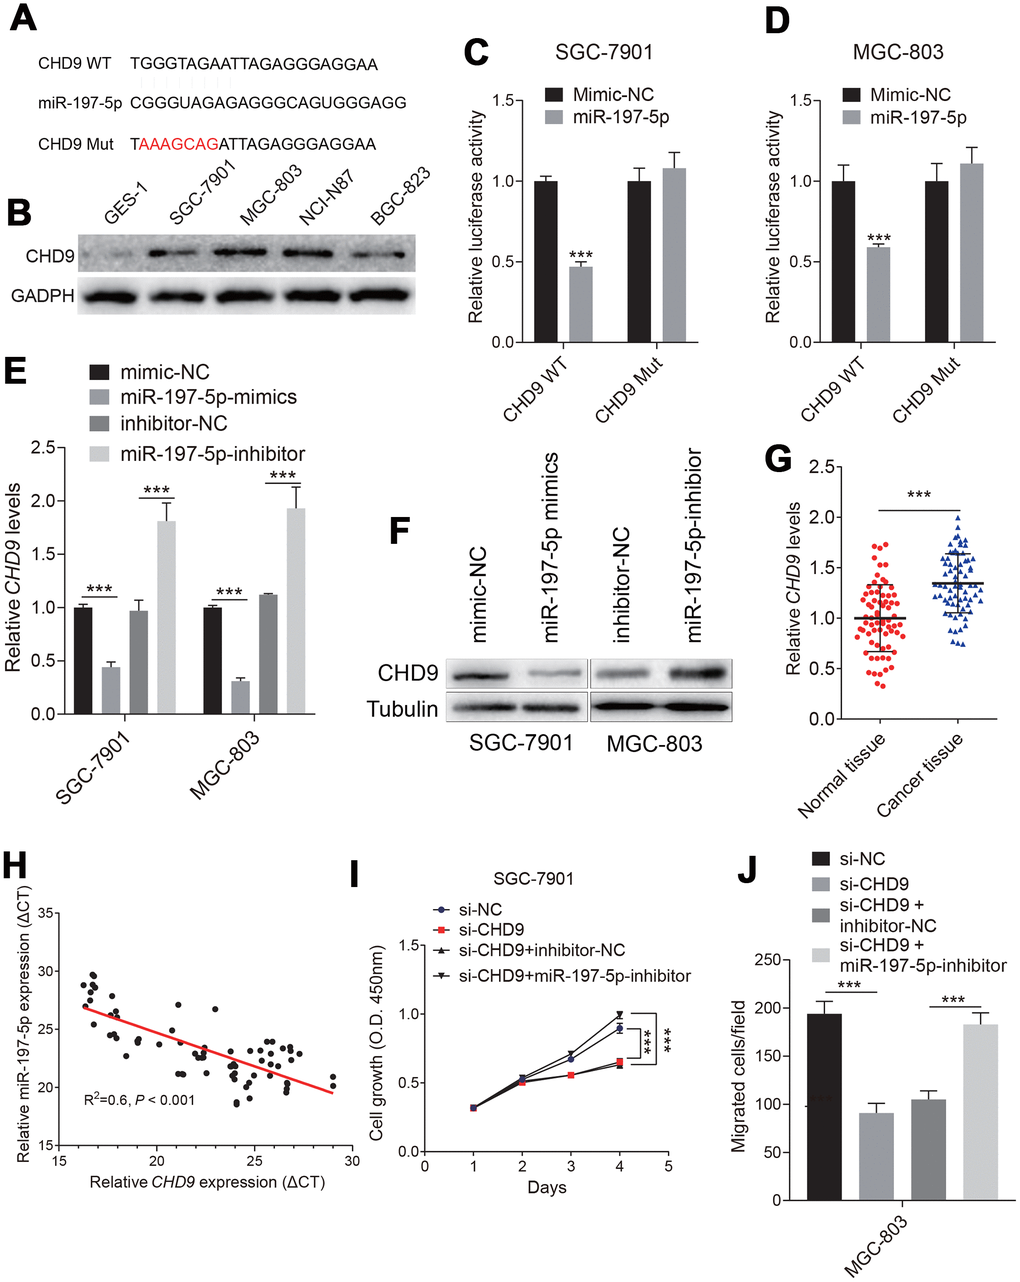 Identification of the targeting relationship between miR-197-5p and CHD9 in gastric cancer cells. (A) The binding sites of miR-197-5p and mutated CHD9-3’UTR were predicted by StarBase v.3.0. (B) The CHD9 expression status in different cell were shown. (C, D) The luciferase activity in SGC-7901 and MGC-803 cells co-transfected with CHD9-WT or CHD9-MUT and miR-197-5p-mimics or mimics-NC was evaluated by dual-luciferase reporter assay. (E, F) The mRNA and protein expression levels of CHD9 in SGC-7901 and MGC-803 cells transfected with mimics-NC, miR-197-5p-mimics, inhibitor-NC or miR-197-5p-inhibitor were examined by RT-qPCR and western blot, respectively. (G) CHD9 expression in gastric cancer tissues compared with in normal tissues was detected by RT-qPCR. (H) The correlation between miR-197-5p expression and CHD9 expression in gastric cancer tissues was analyzed by Pearson’s test (R2=0.6, P I) The proliferation of SGC-7901 and MGC-803 cells transfected with mimics-NC, miR-197-5p-mimics, miR-197-5p-mimics + pcDNA3.1 or miR-197-5p-mimics + pcDNA3.1-CHD9 was examined by MTT assay. (J) The migration of SGC-7901 and MGC-803 cells was evaluated by Transwell assay without Matrigel; *** P 